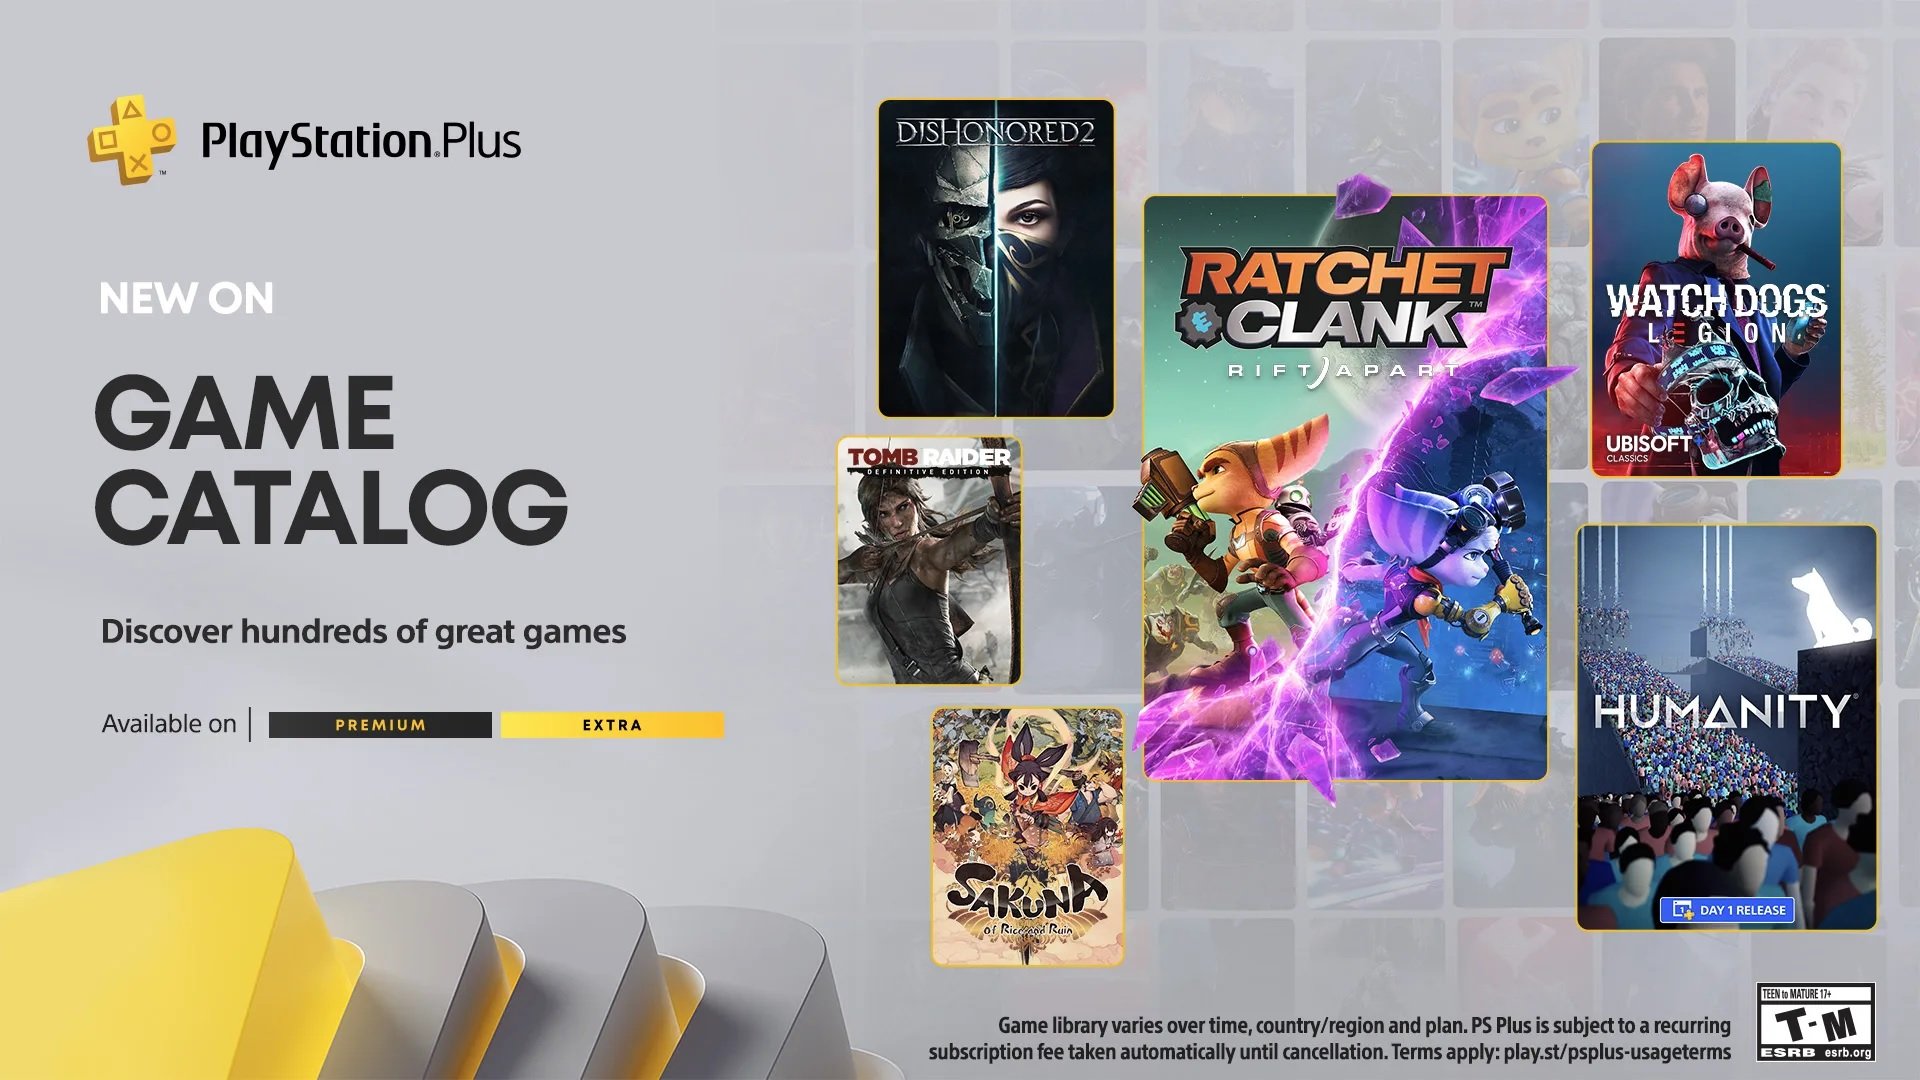 May’s PlayStation Plus Game Catalogue and Classics titles are available